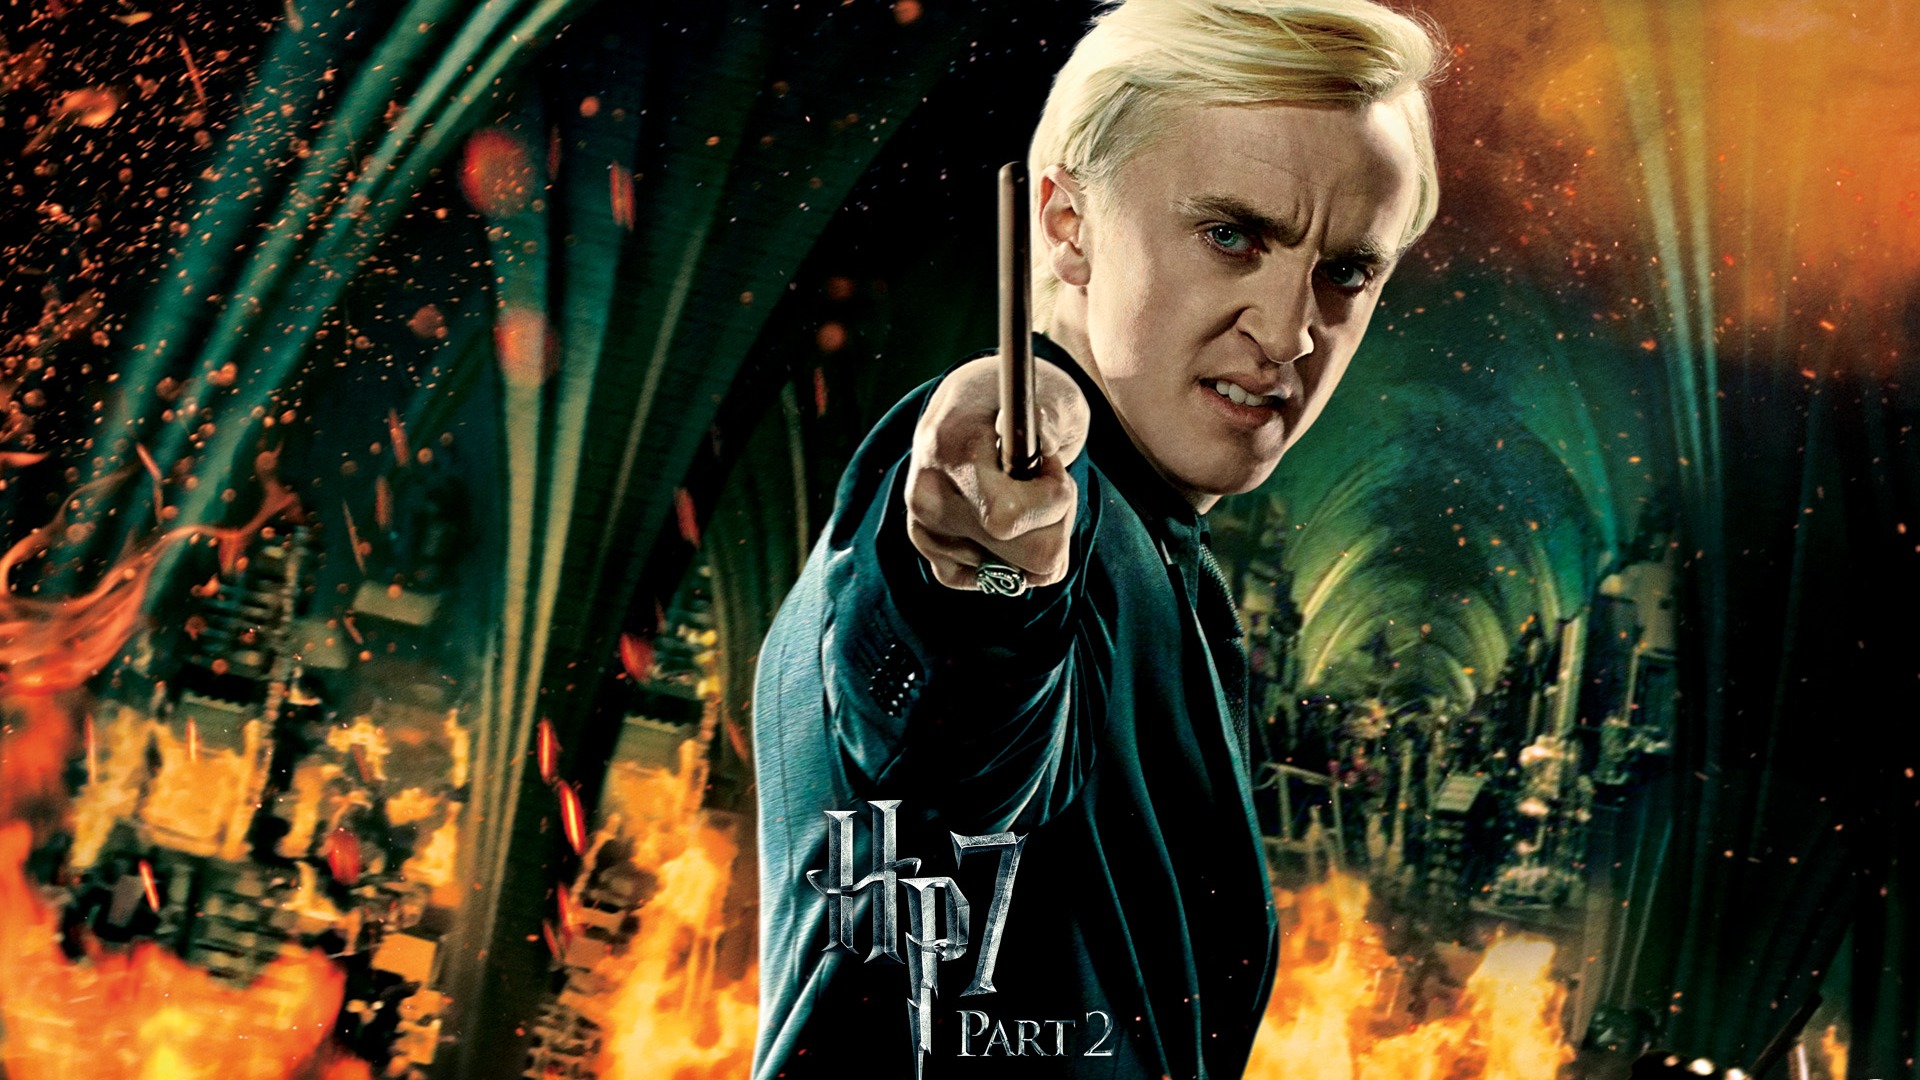 2011 Harry Potter and the Deathly Hallows HD wallpapers #19 - 1920x1080